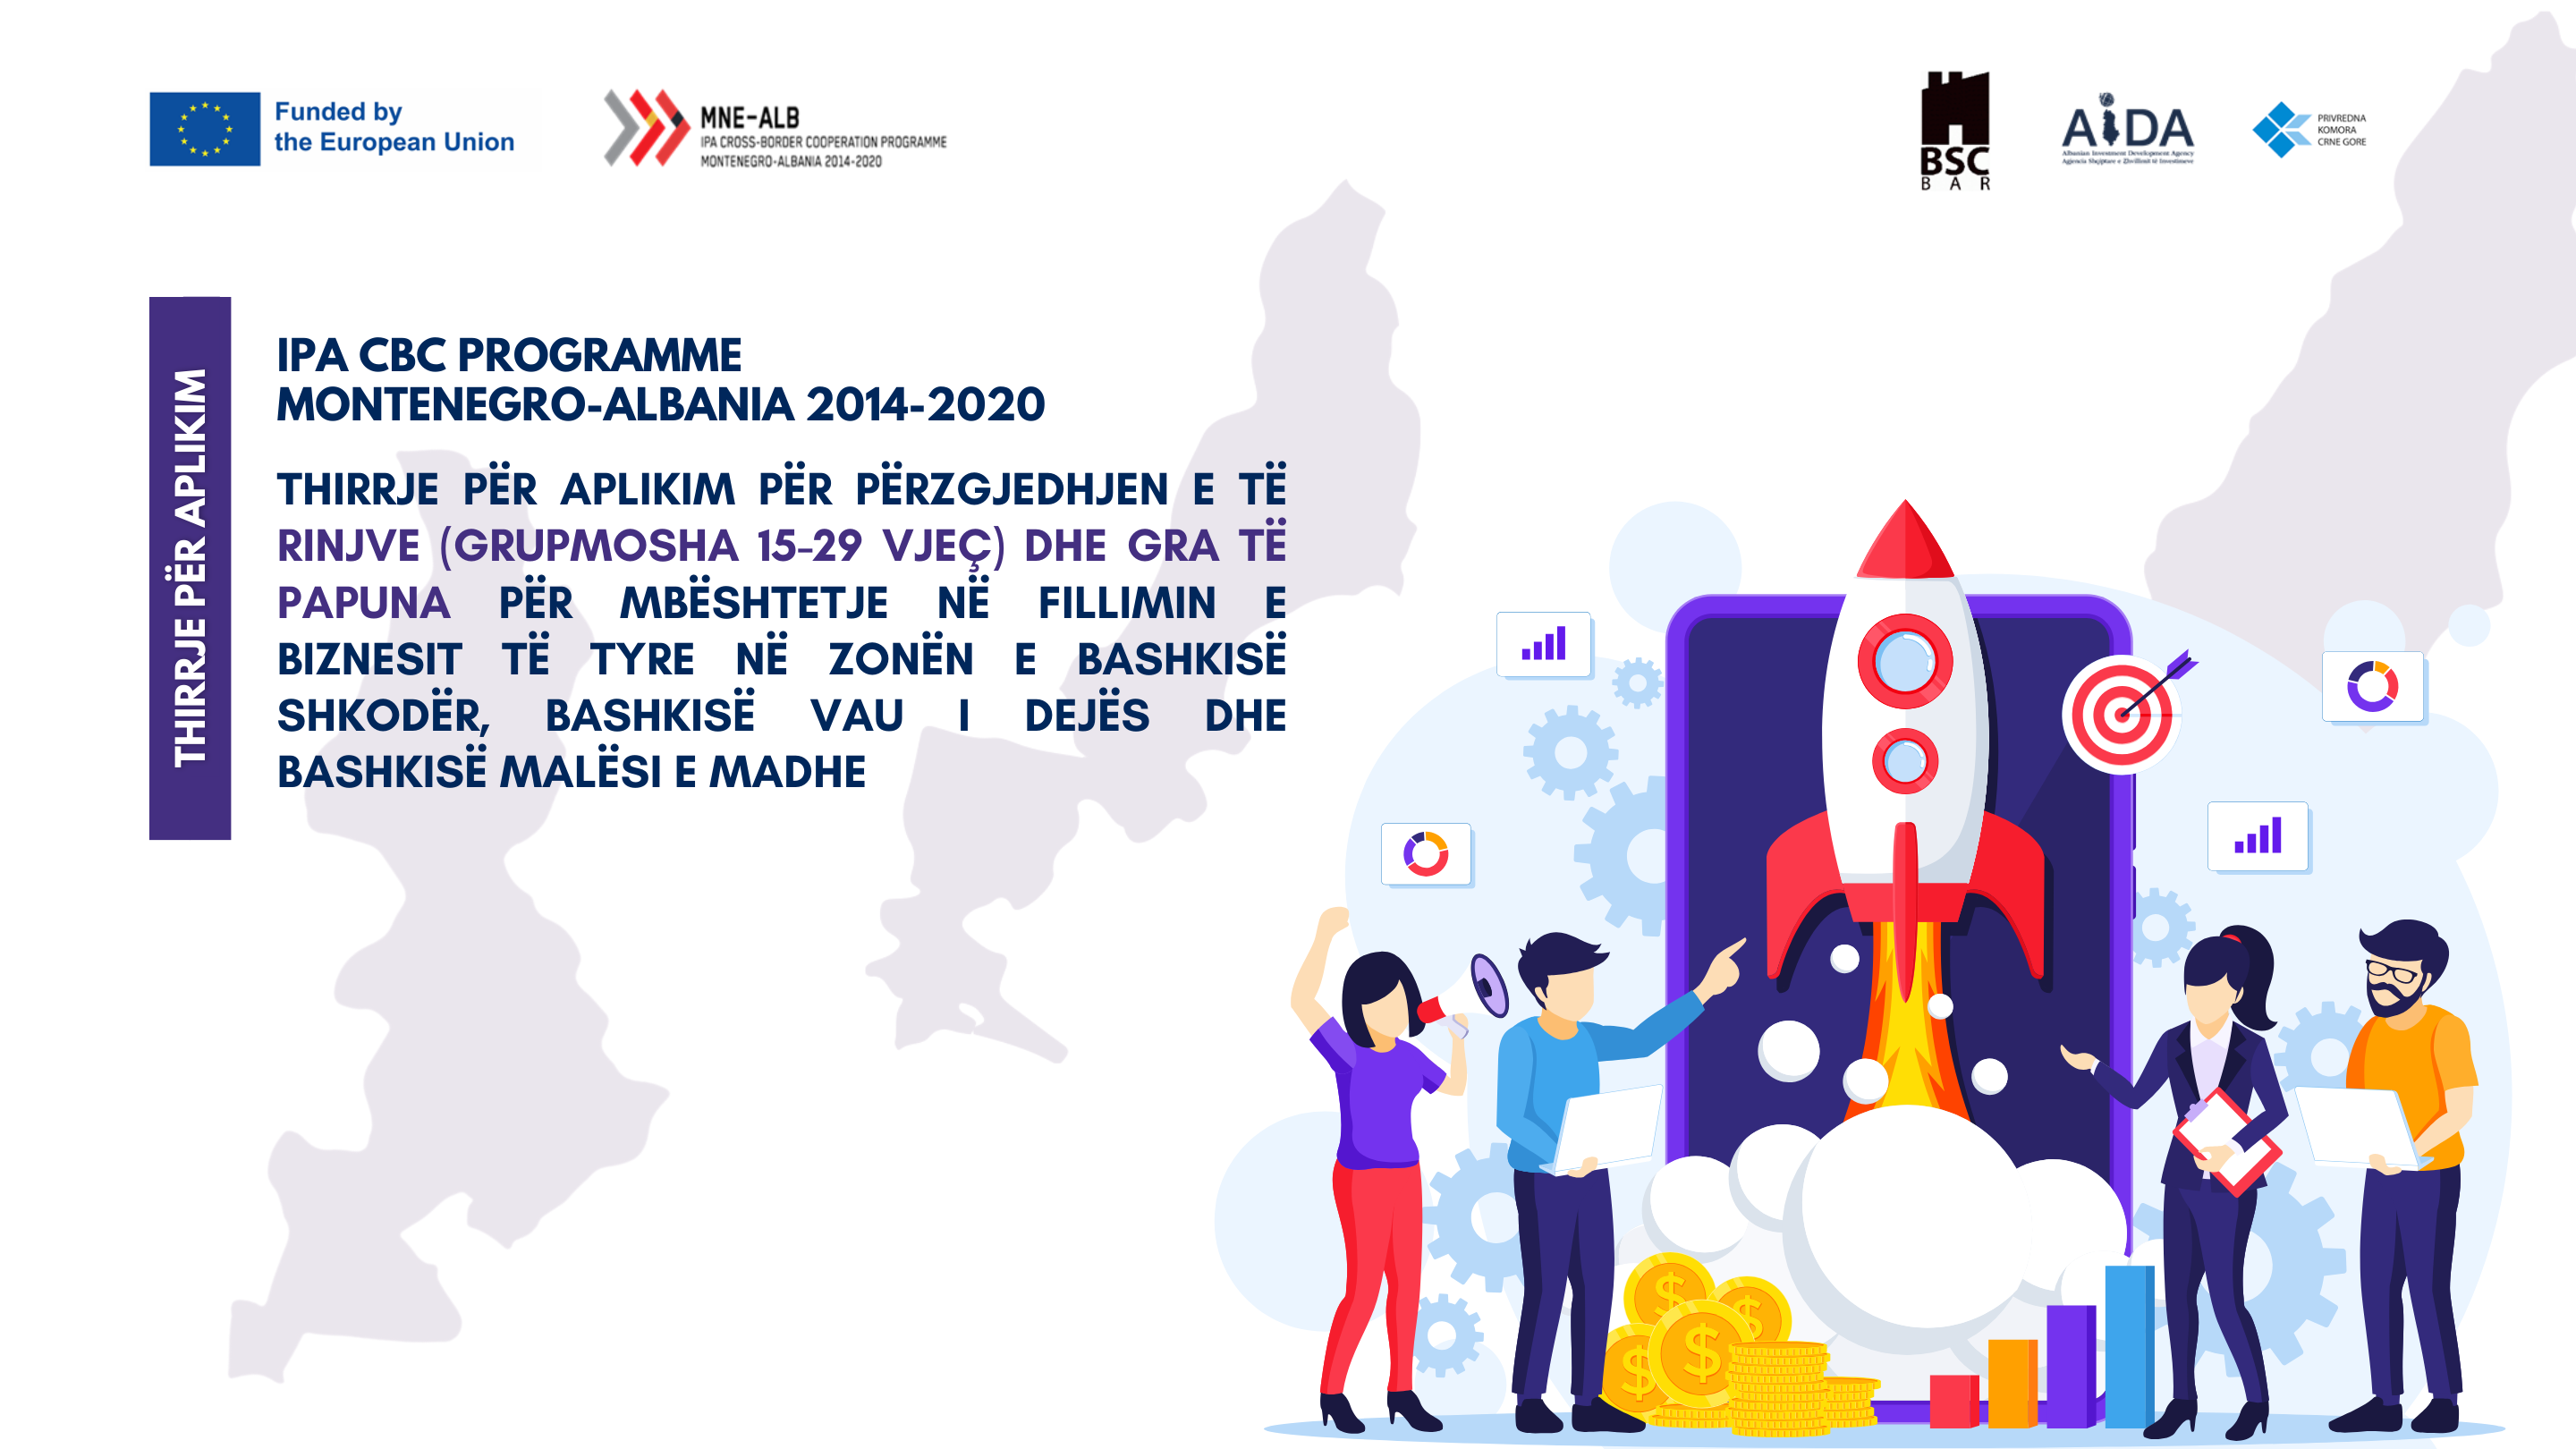 Call for applications for the selection of young people (age 15-29) and unemployed women for support in starting their business in the area of Muncipality of Shkodra, Municipality of Vau i Dejes and Municipality of Malesi e Madhe